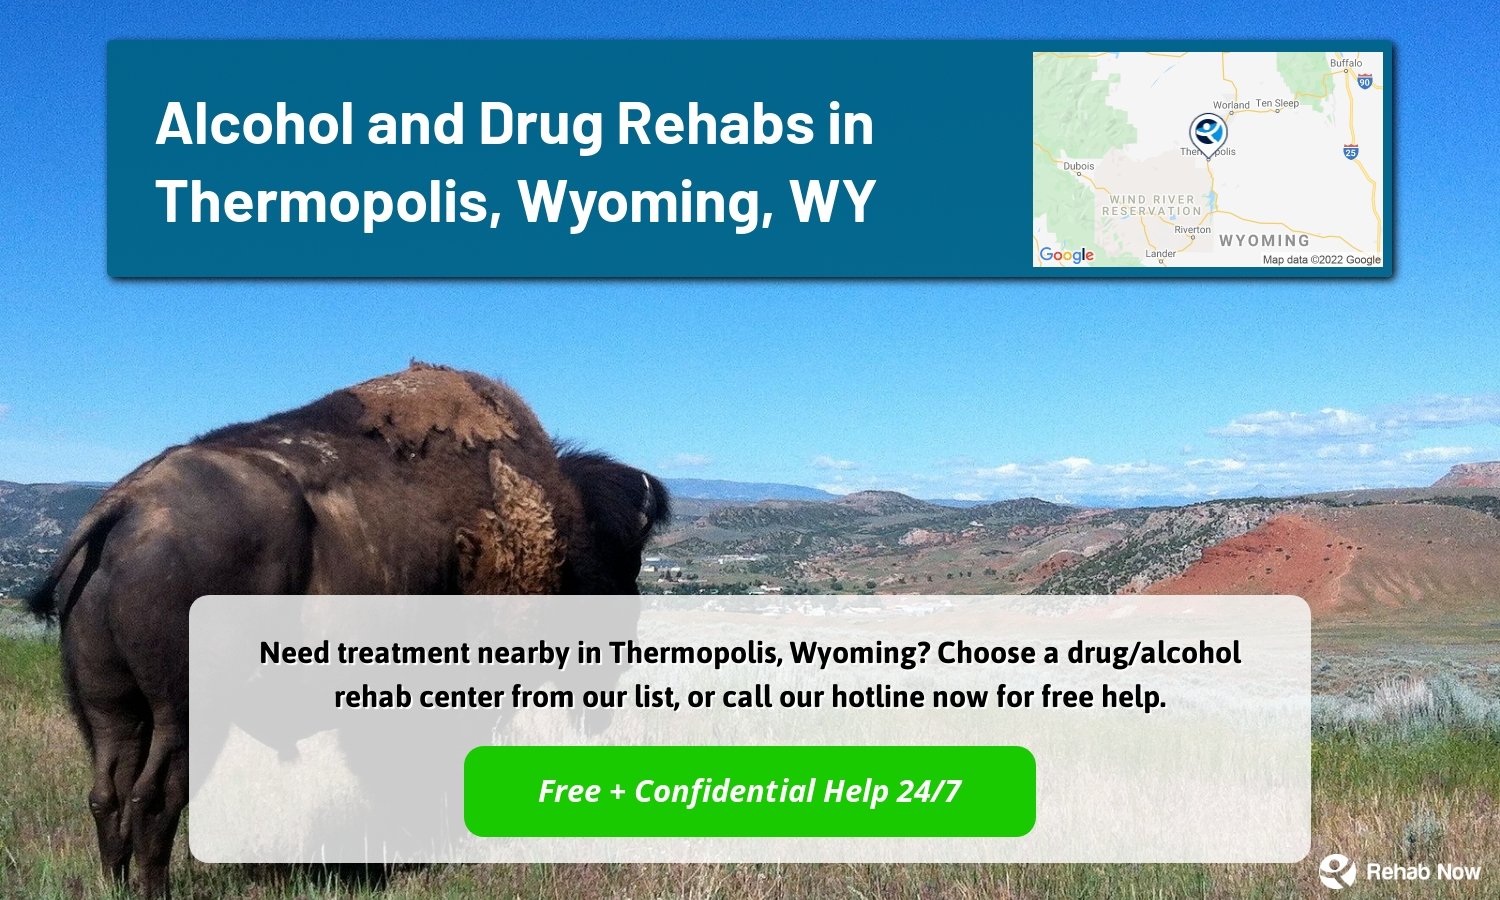 Need treatment nearby in Thermopolis, Wyoming? Choose a drug/alcohol rehab center from our list, or call our hotline now for free help.